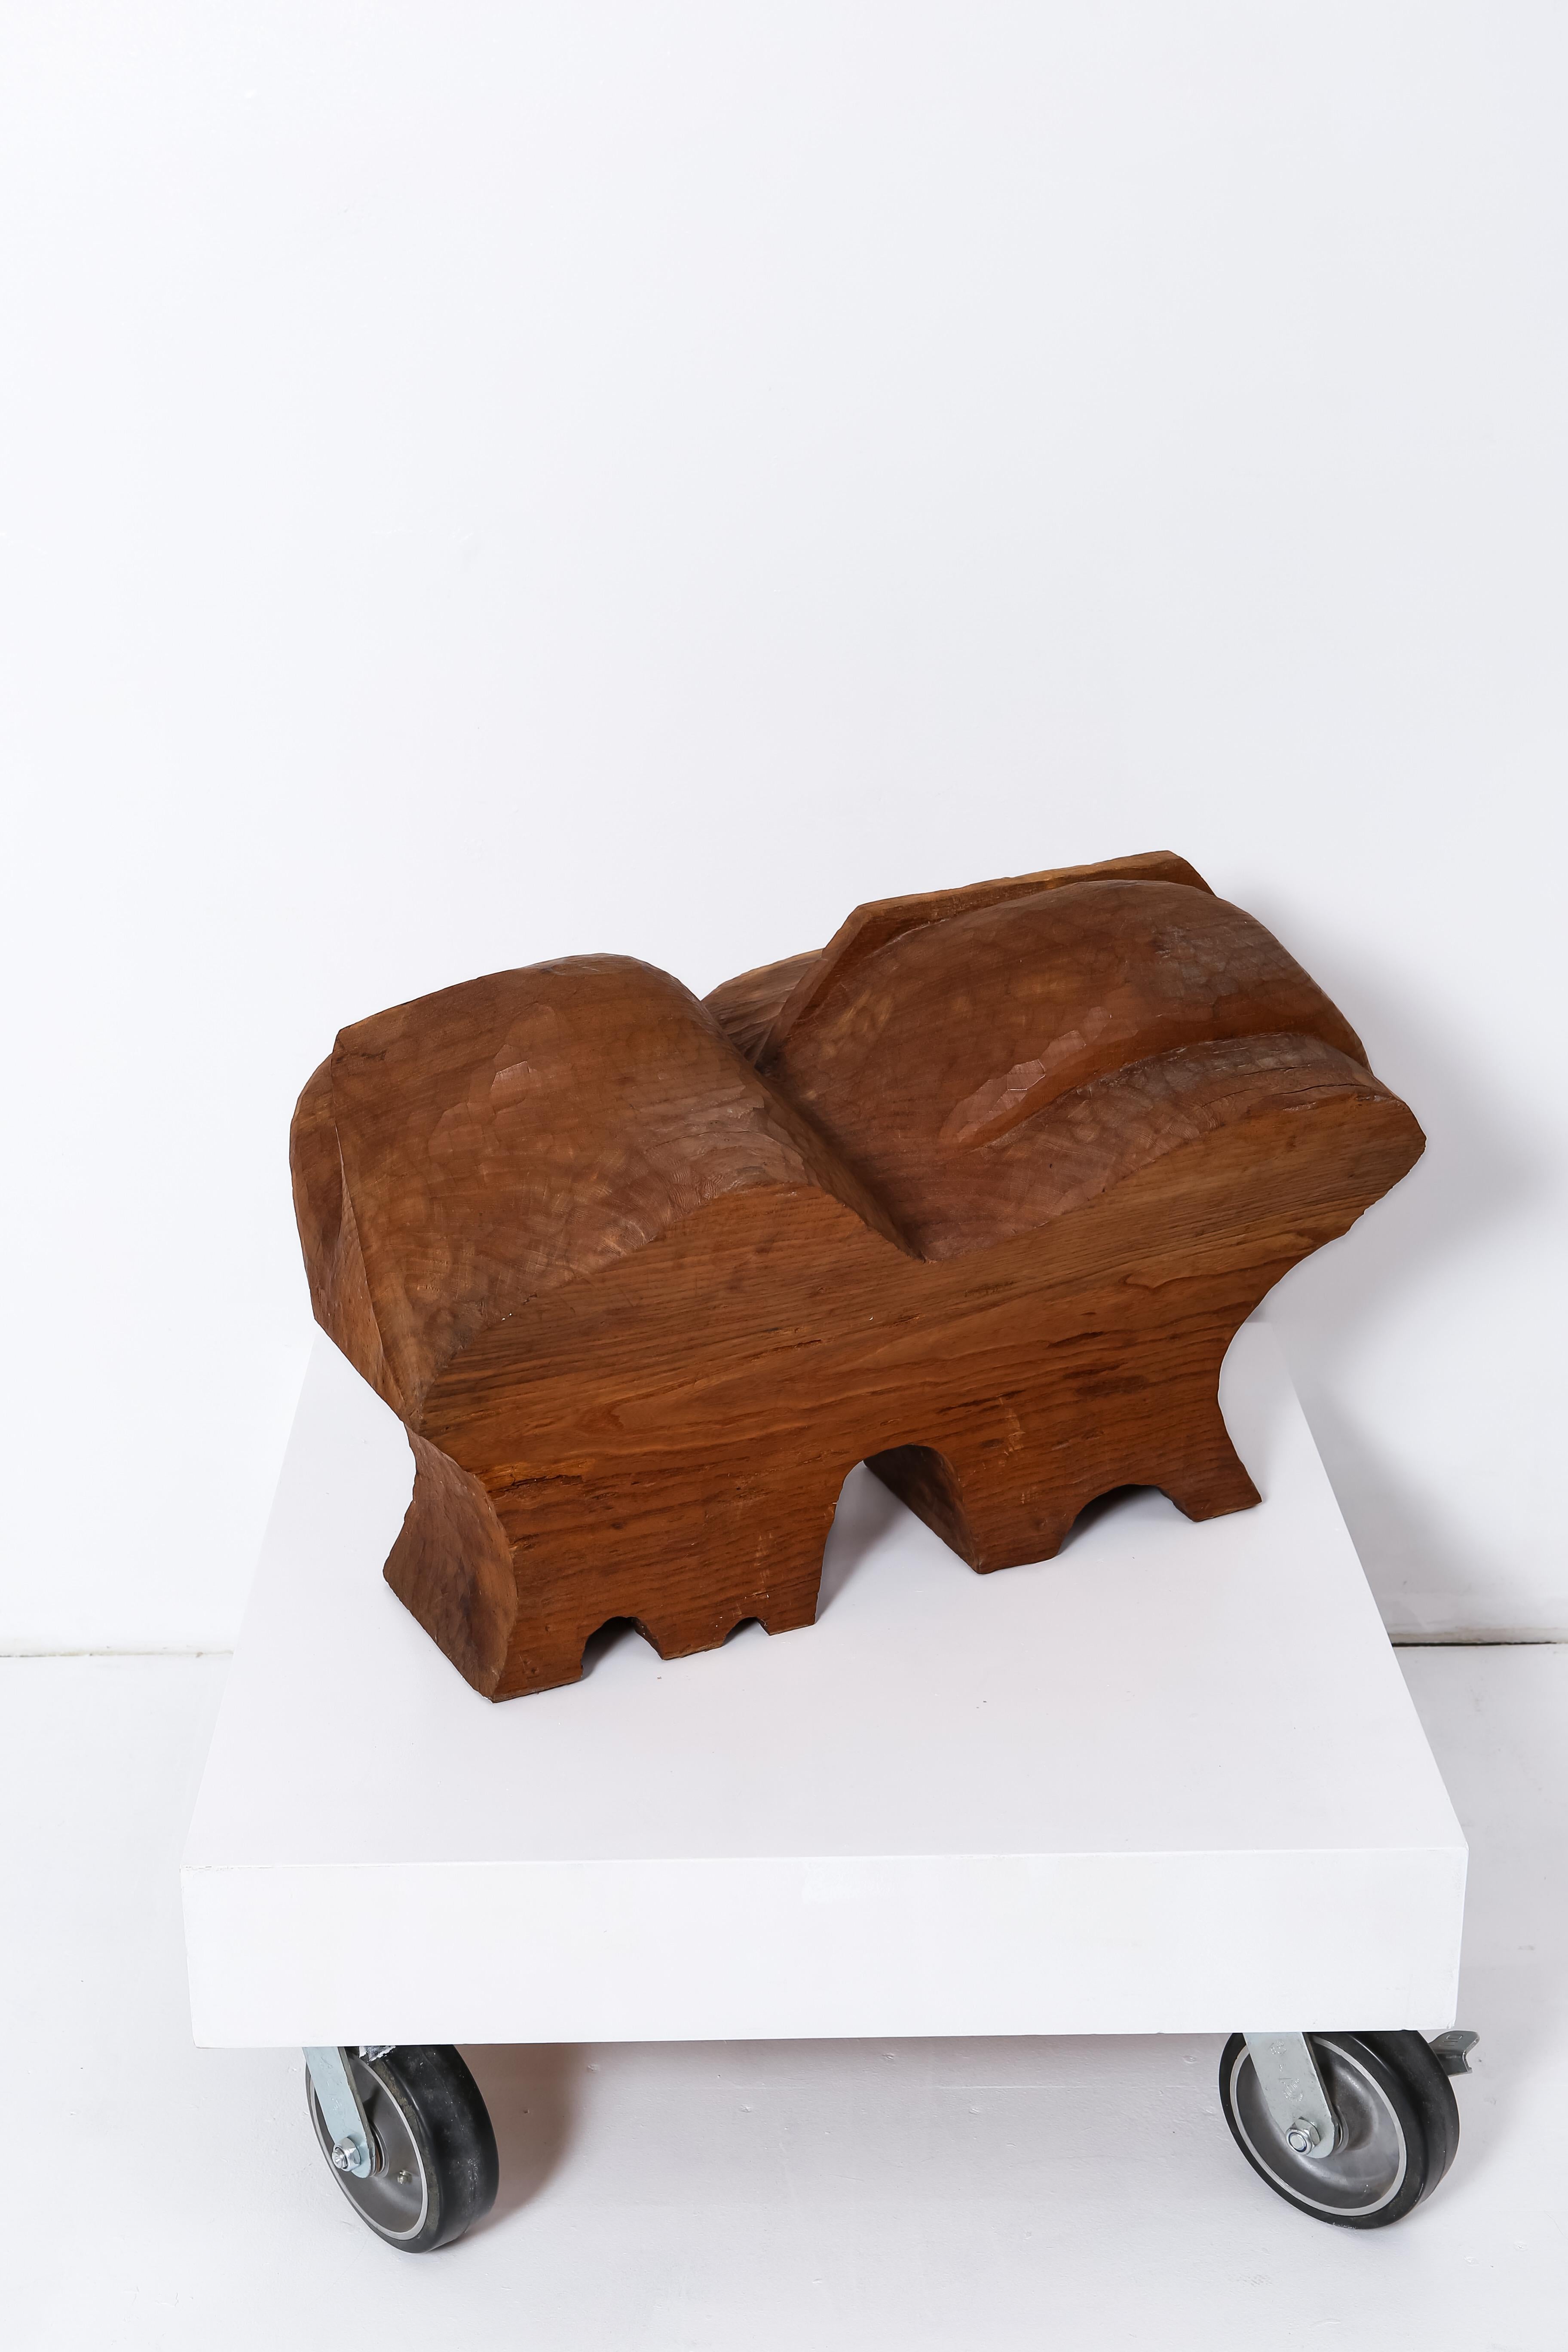 American Abstract wood sculpture by Leroy Setziol For Sale